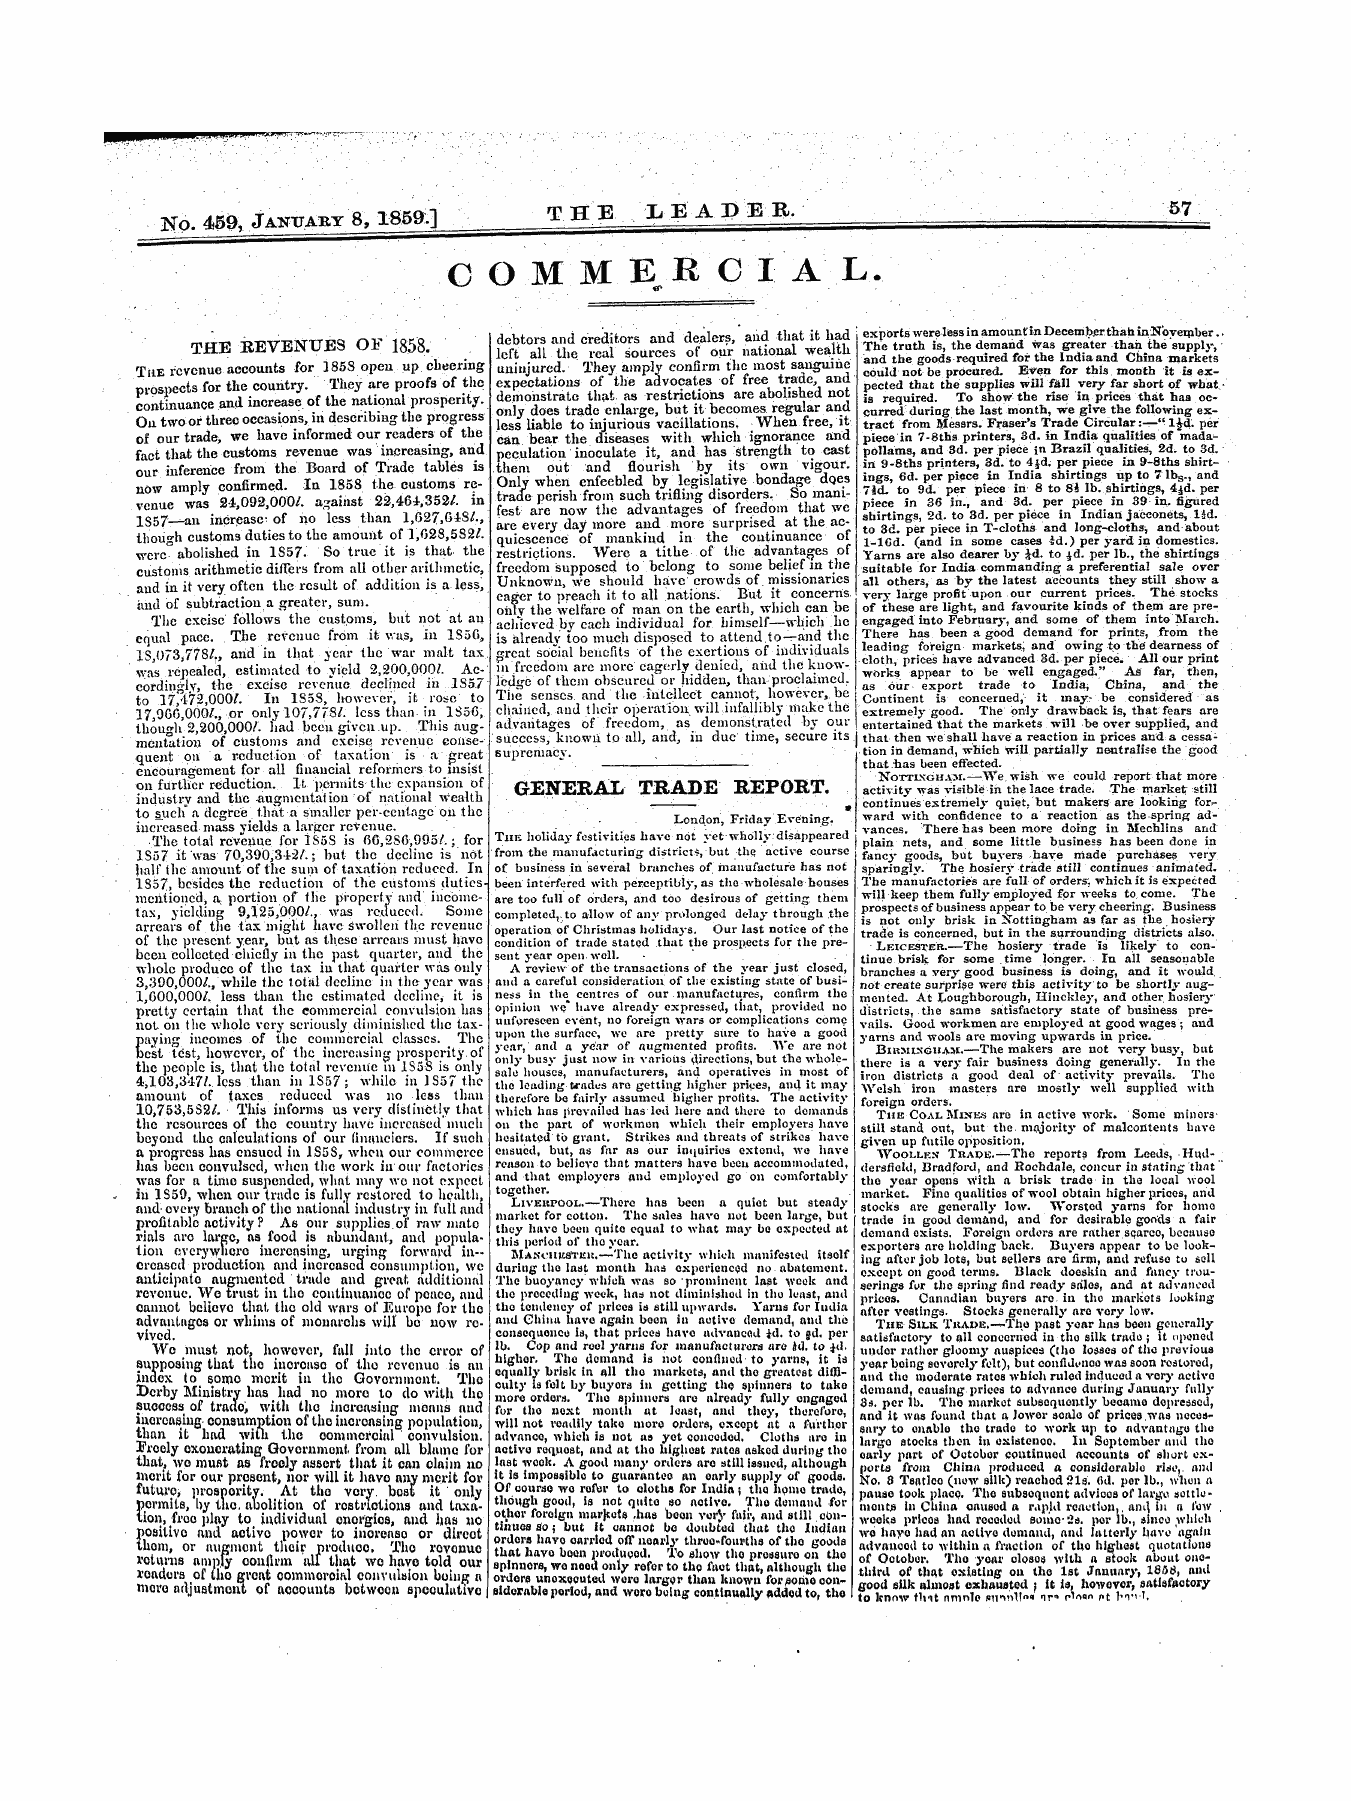 Leader (1850-1860): jS F Y, 1st edition: 25